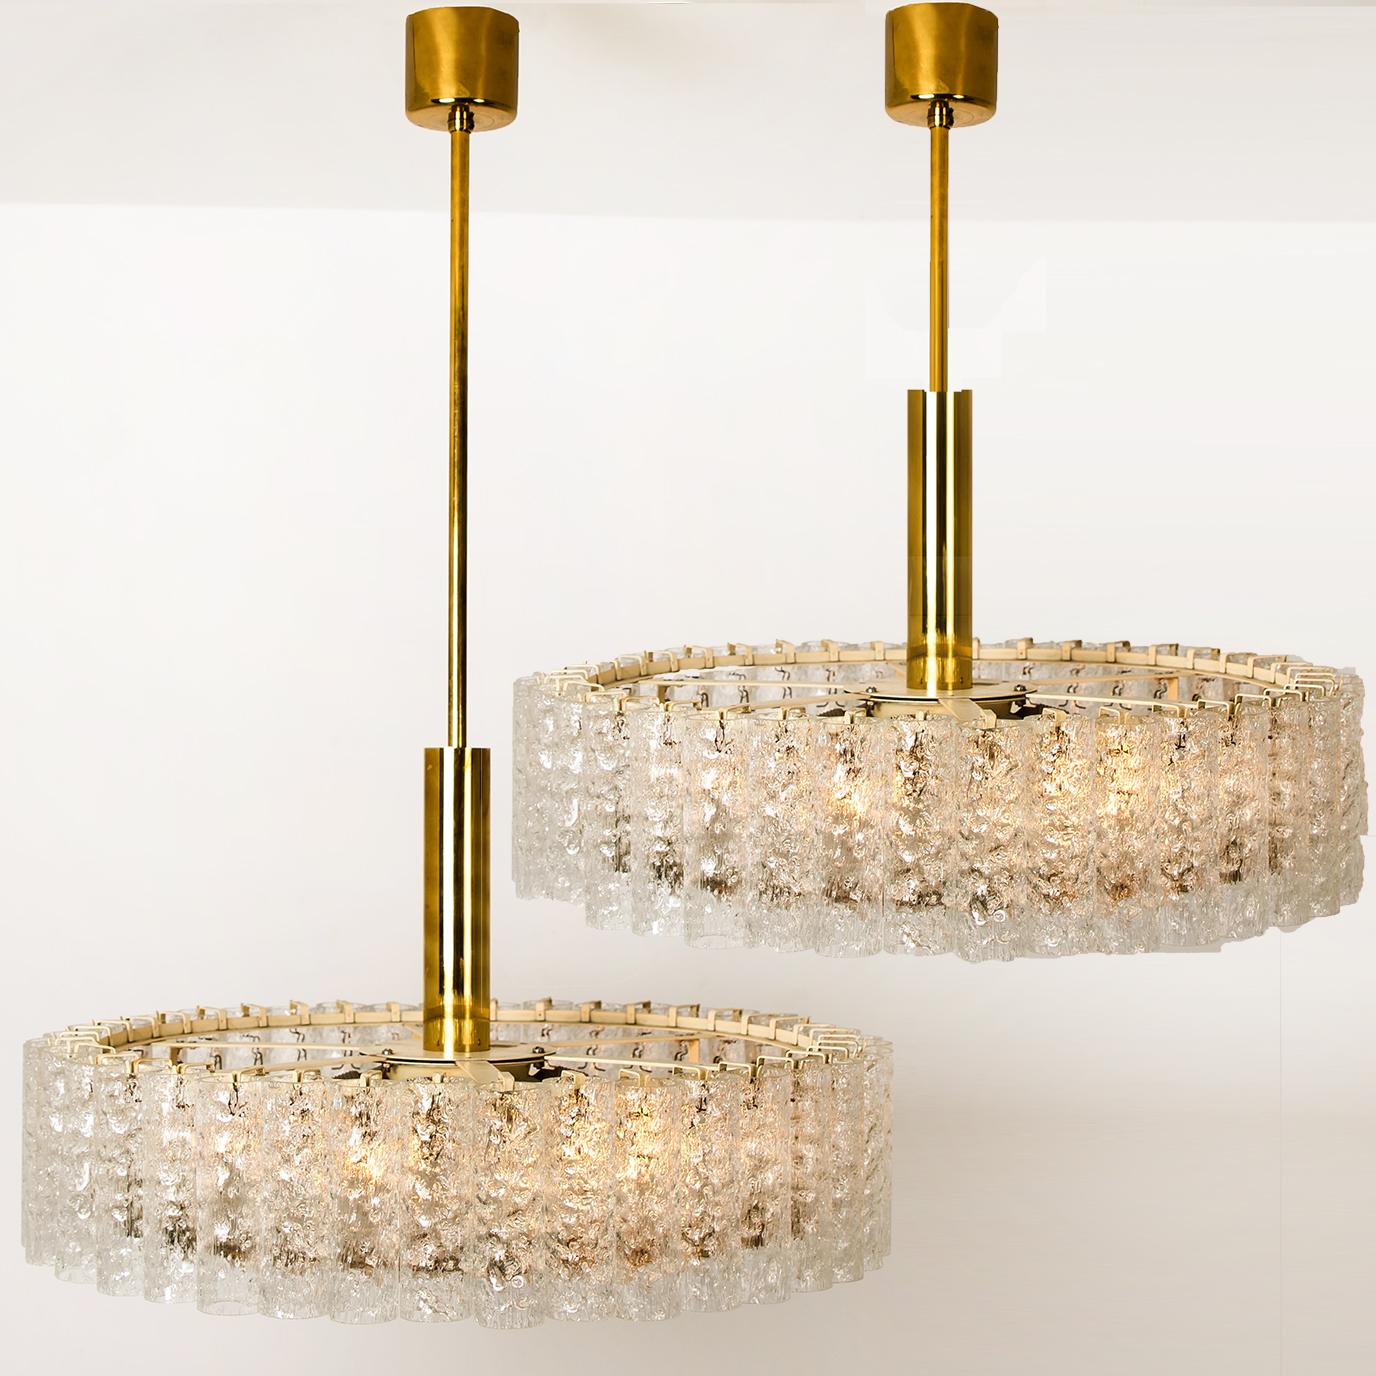 Mid-Century Modern Pair of Large Glass Brass Light Fixtures by Doria, Germany, 1969